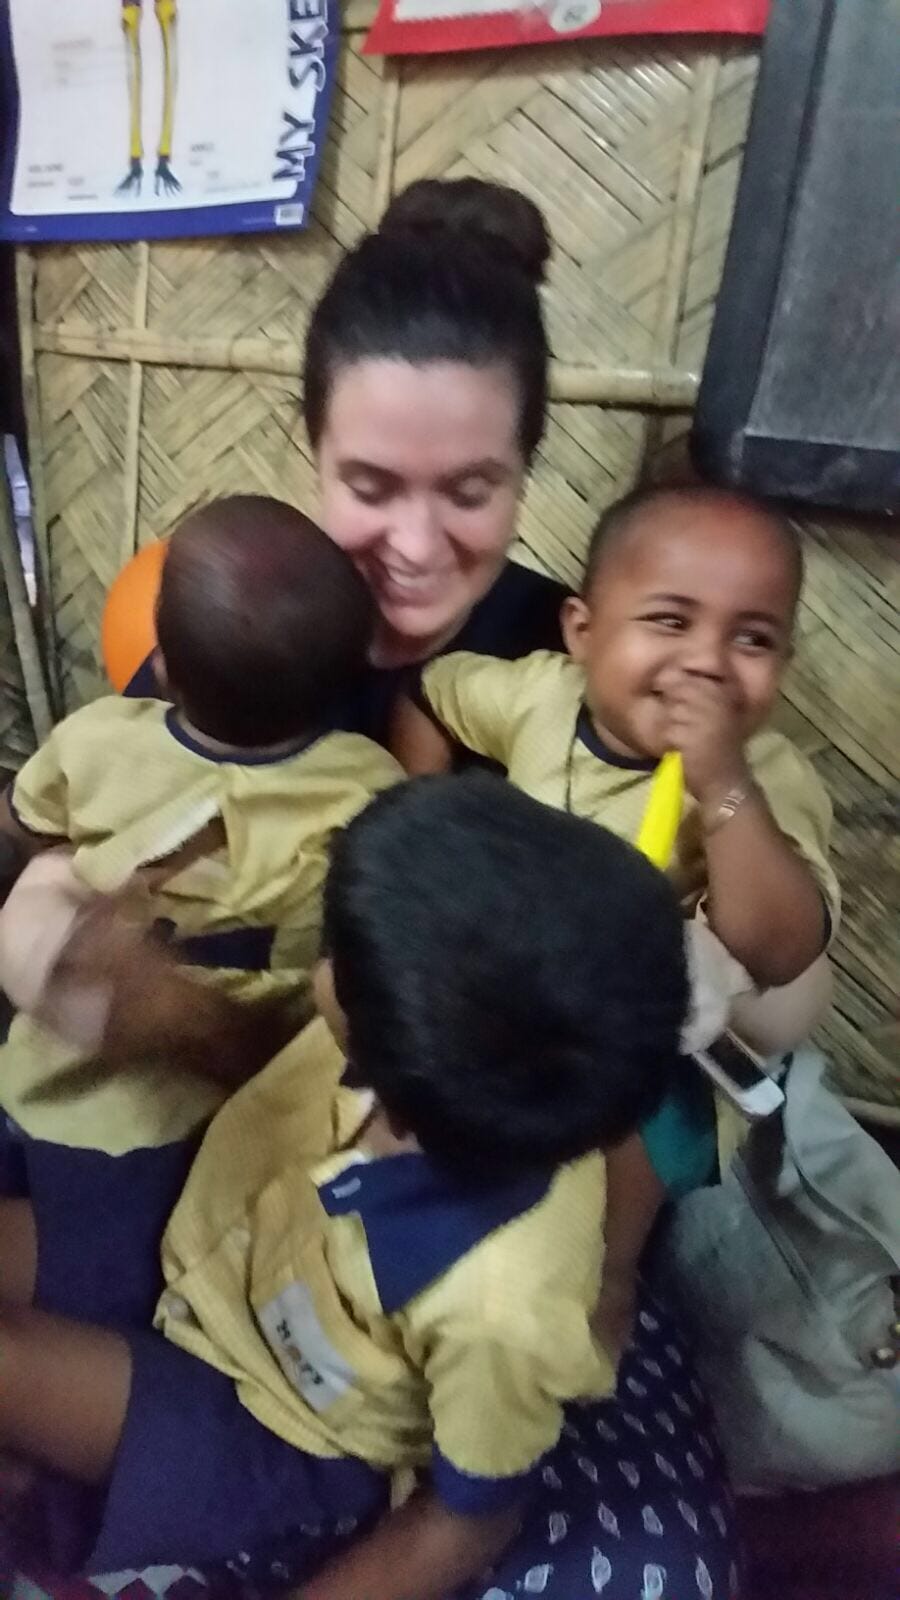 April 2016: Desmond College staff and students had a wonderful time in Kolkata meeting the children who are helped and supported by the HOPE foundation